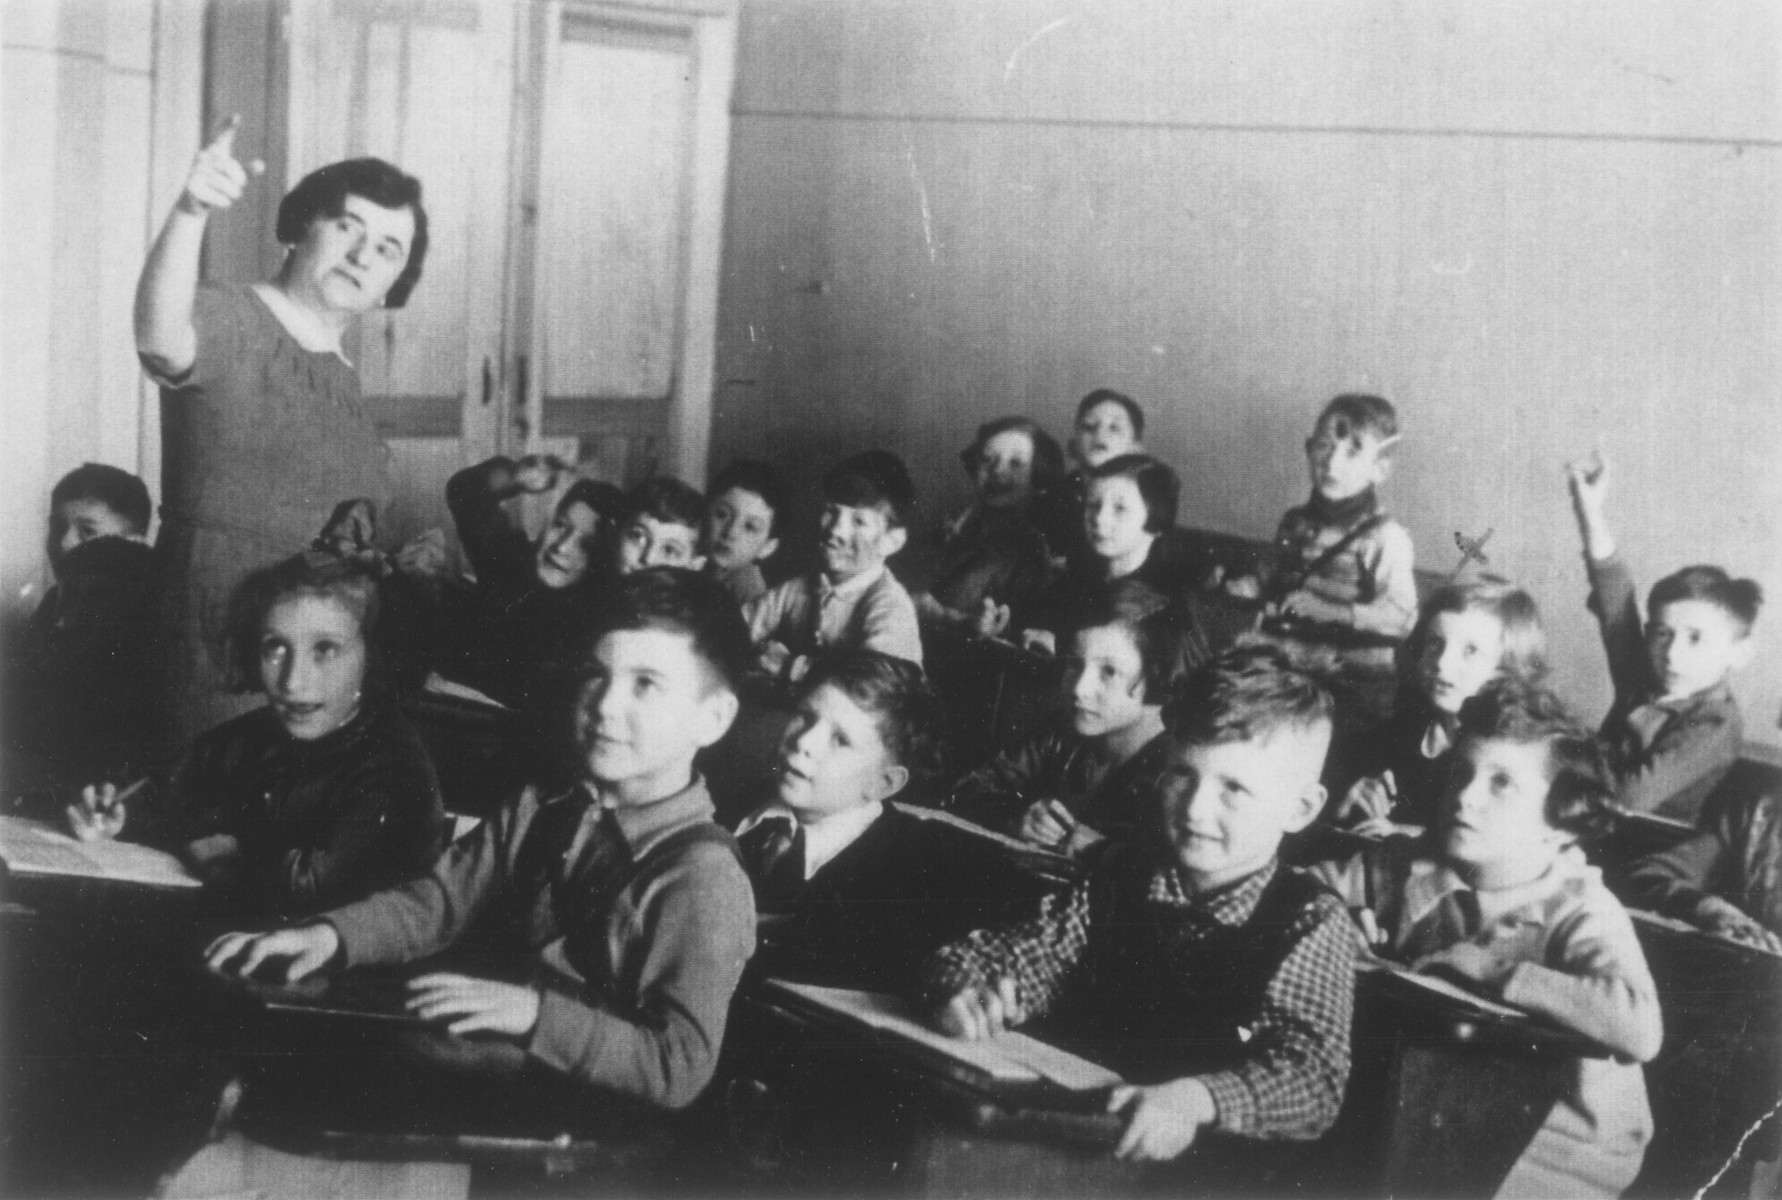 Students sit at their desks in a first grade classroom in Berlin.

Hannelore Mansbacher is sitting on the right side in front of the child who is holding up his hand. The teacher, Hilde Goldschmitt, later emigrated to Israel.